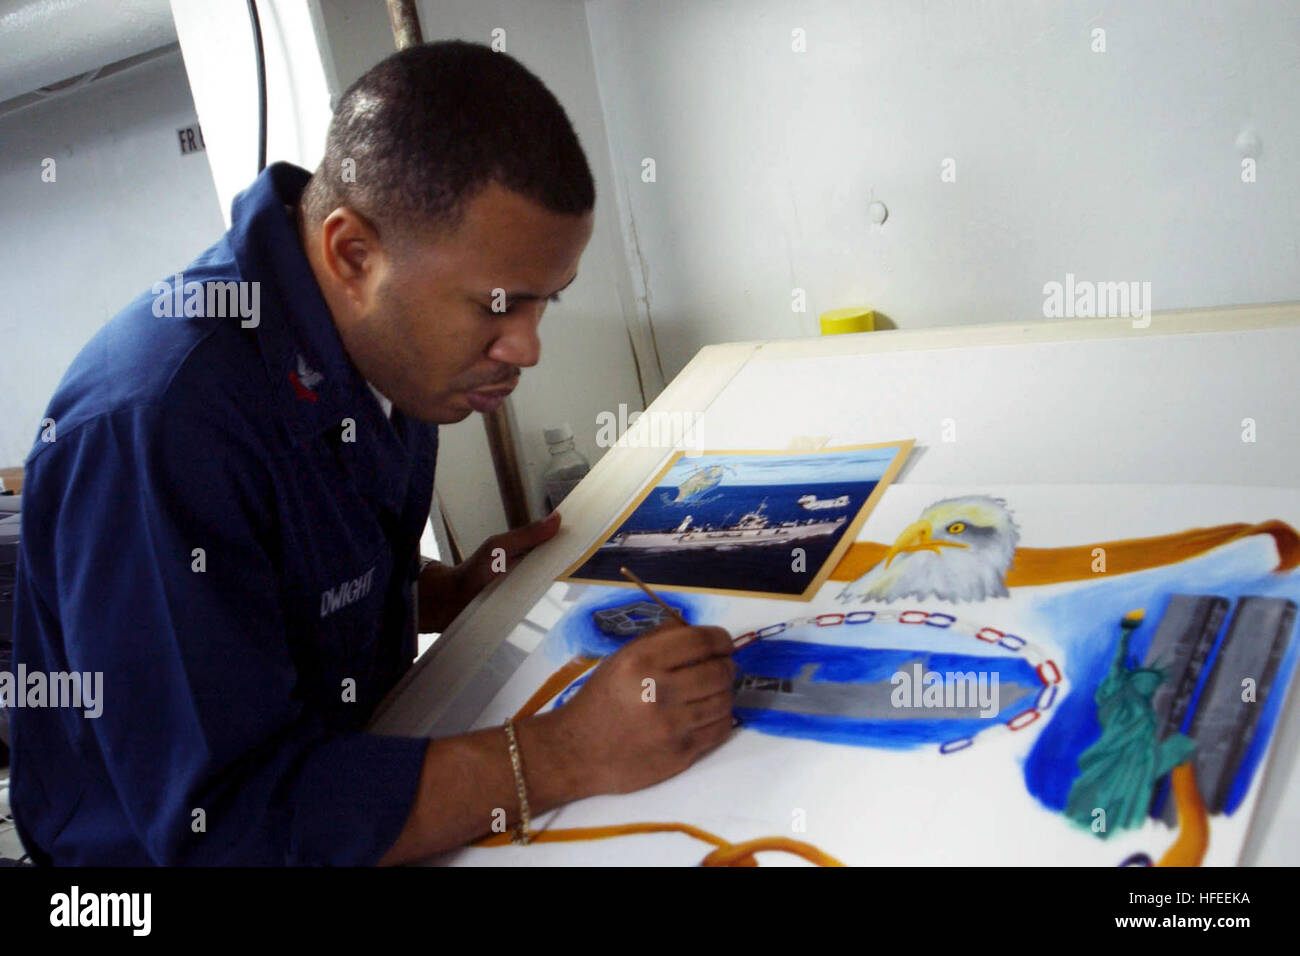 021231-N-9867P-021 Aboard USS Mount Whitney (LCC/JCC 20) Dec. 31, 2002 -- Draftsman 2nd Class Ernie Dwight works on an assignment in the shipÕs photo lab.  The Mount Whitney and her embarked Marine detachment are deployed to the Horn of Africa region to participate in Operation Enduring Freedom and the continuing war on terrorism.  U.S. Navy photo by PhotographerÕs Mate 3rd Class Scott Phillips.  (RELEASED) US Navy 021231-N-9867P-021 Draftsman 2nd Class Ernie Dwight works on an assignment in the ship%%5Ersquo,s photo lab Stock Photo